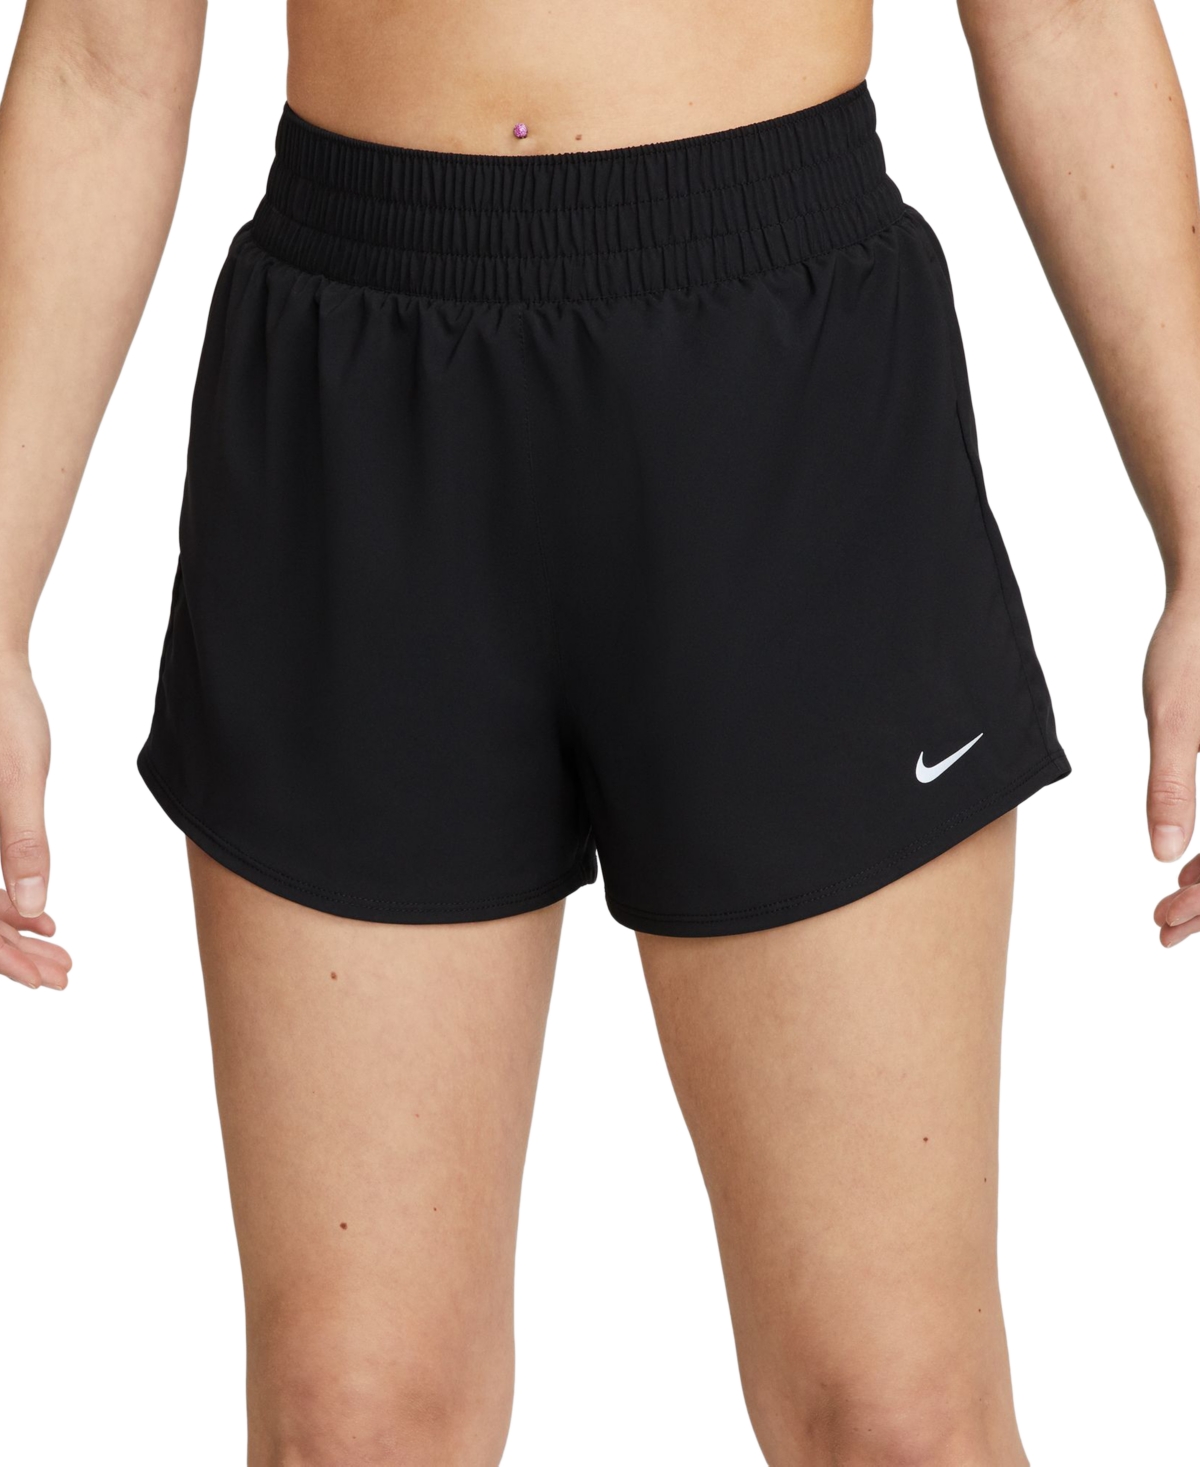 Women's One Dri-fit High-Waisted 3" Brief-Lined Shorts - Black